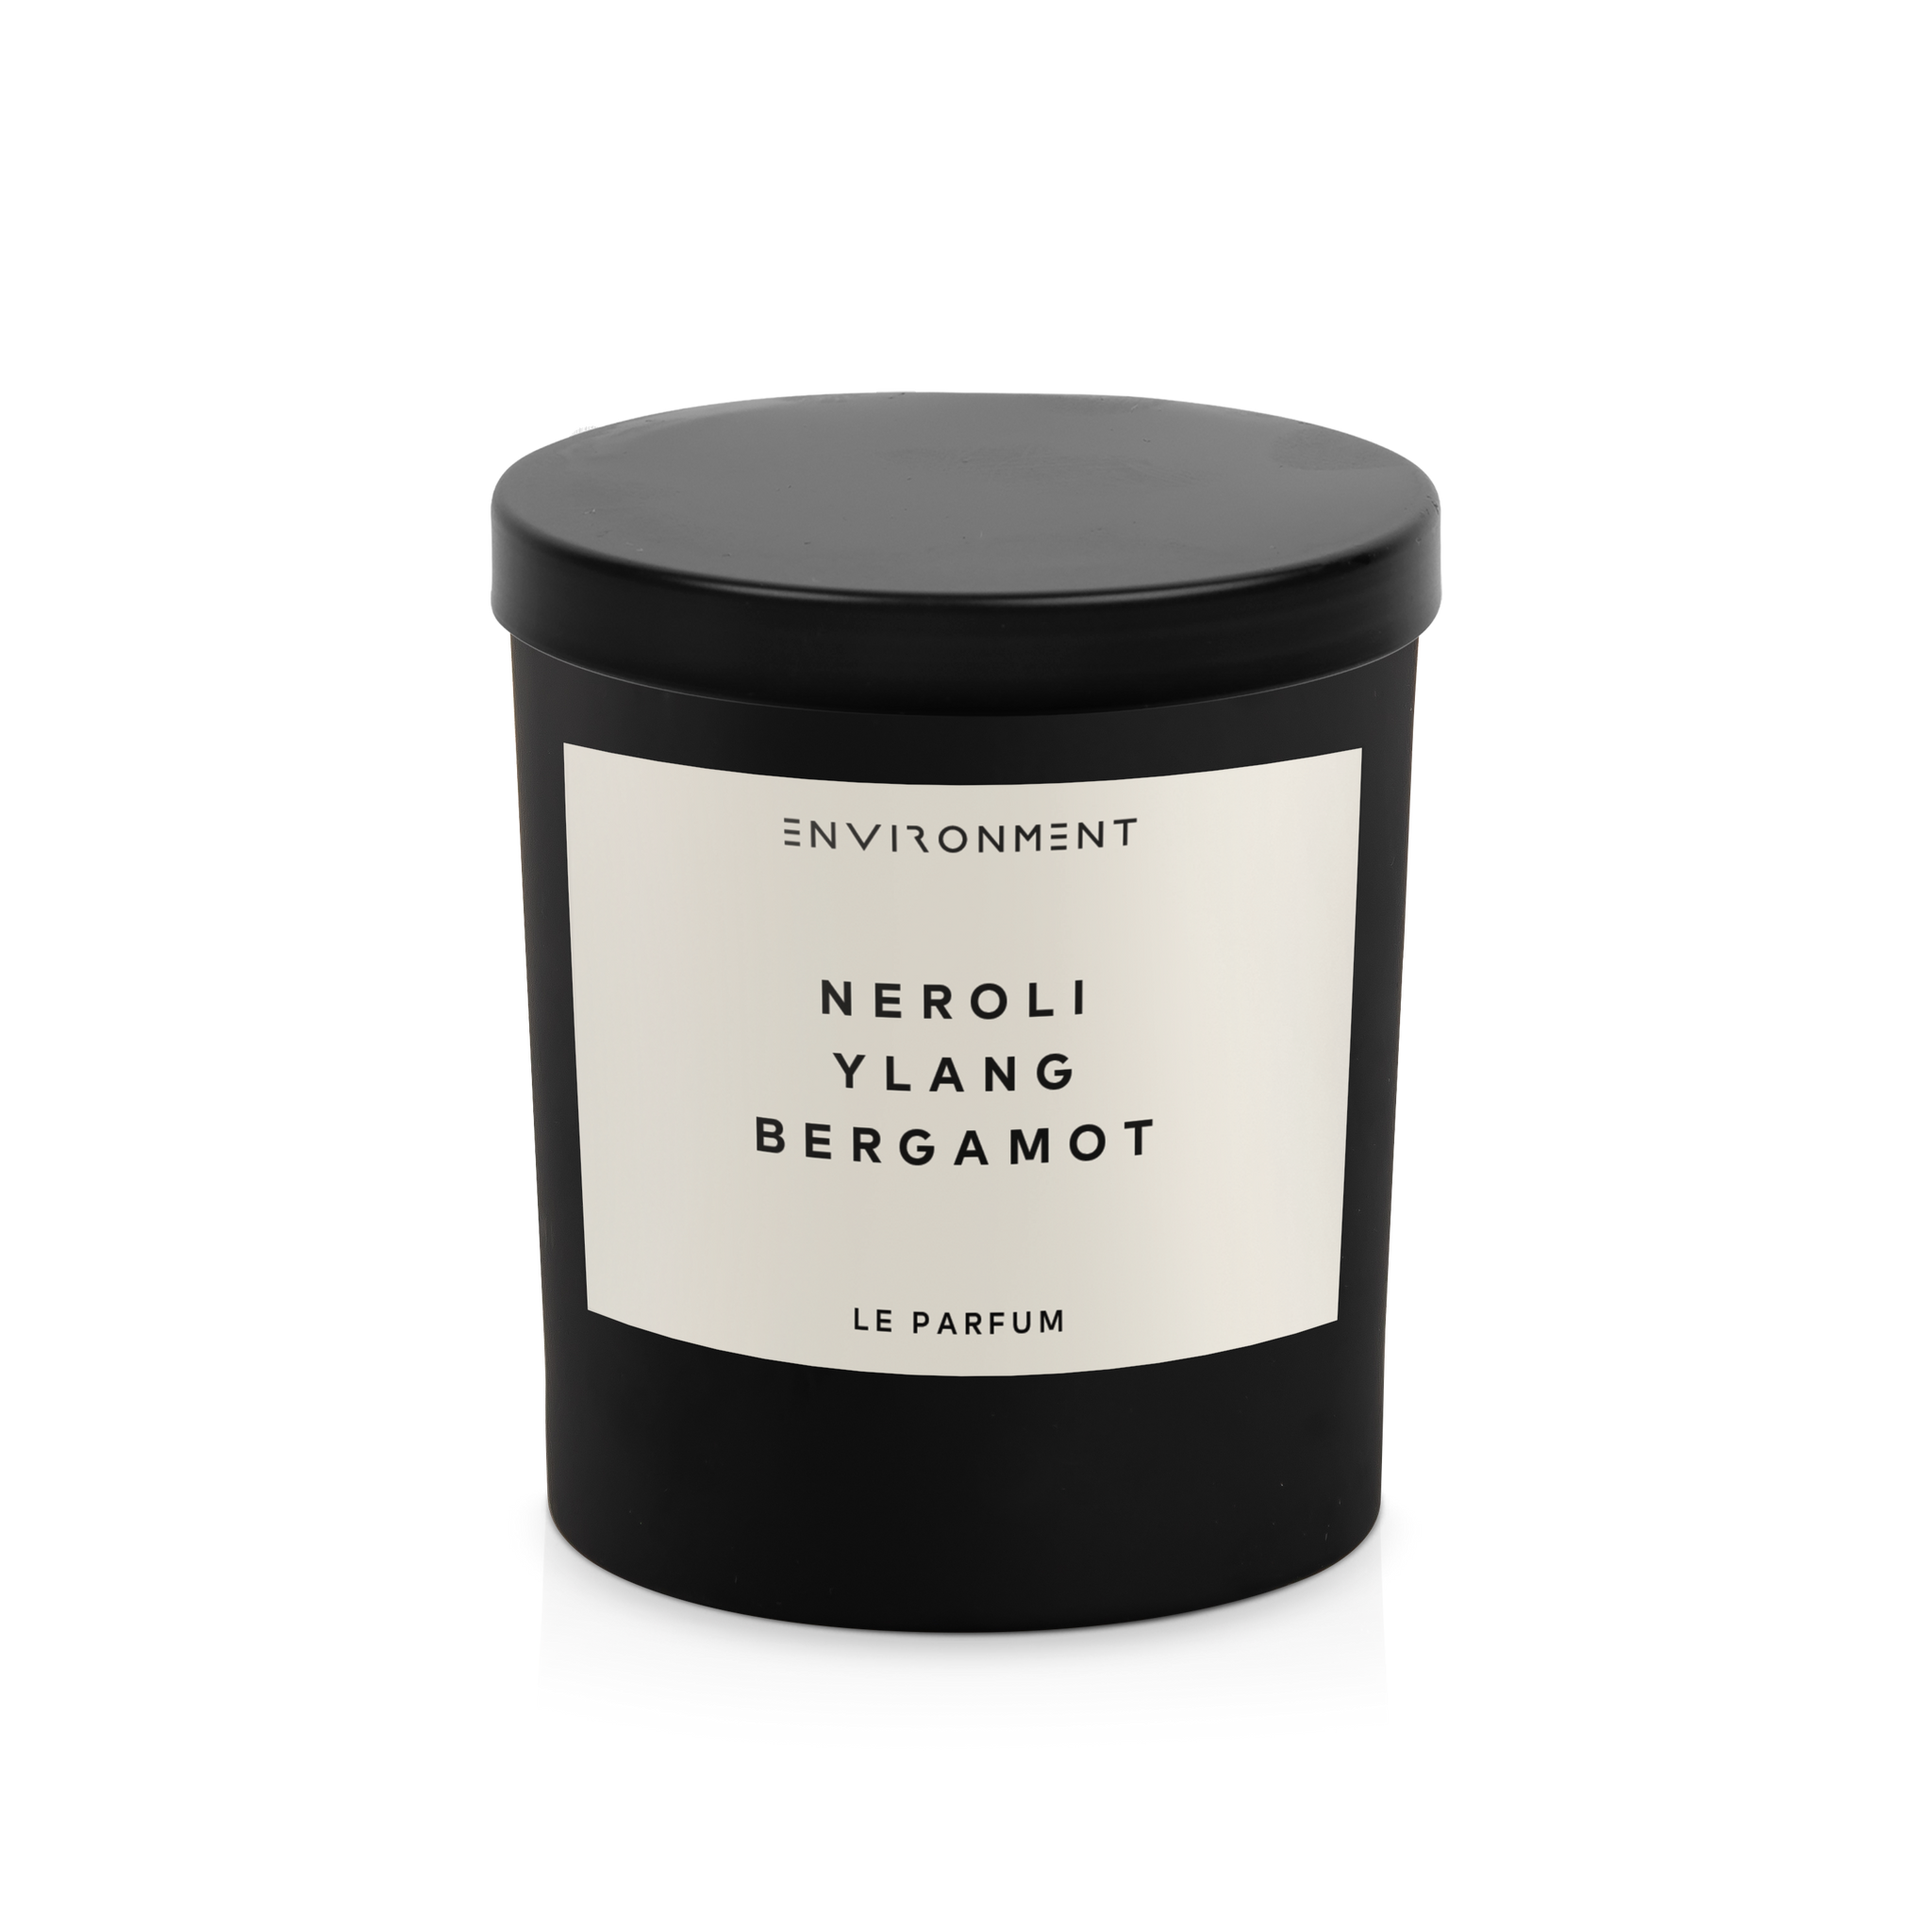 Neroli | Ylang | Bergamot 200ml Diffuser and 8oz Candle Gift Pack (Inspired by Chanel #5®)